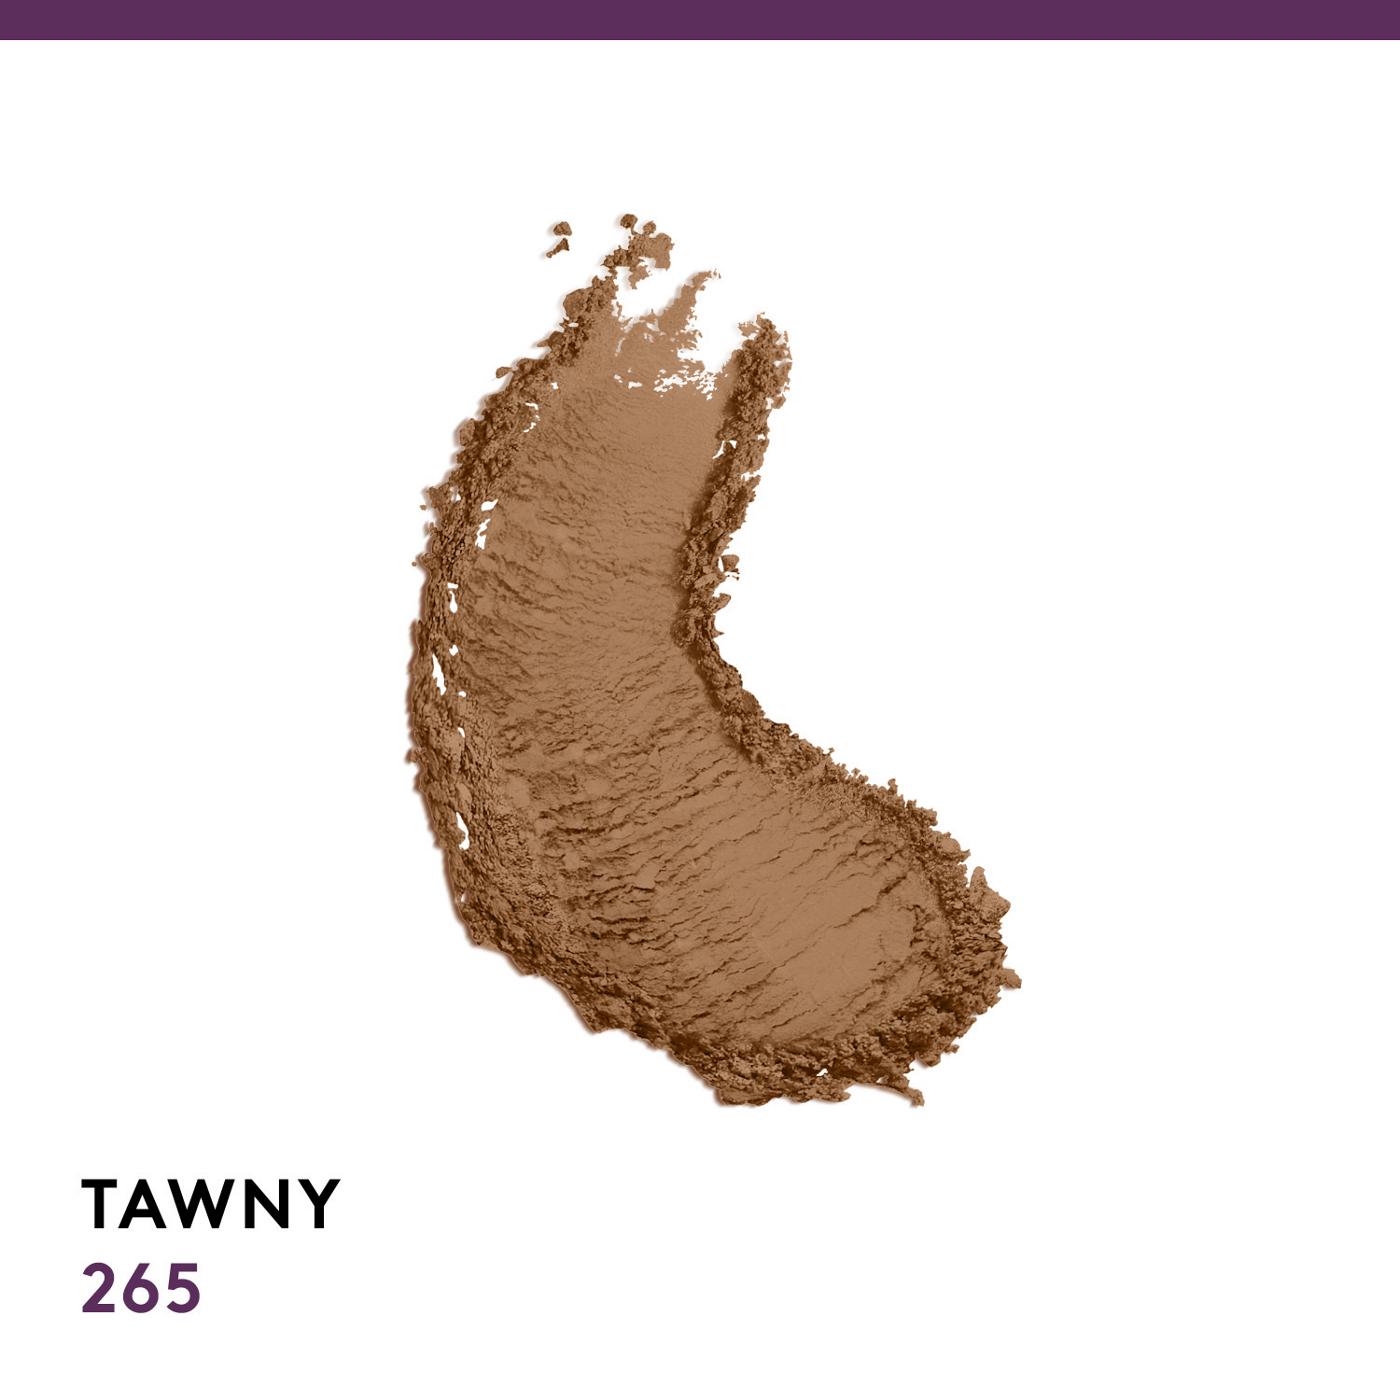 Covergirl Simply Ageless Pressed Powder 265 Tawny; image 7 of 10